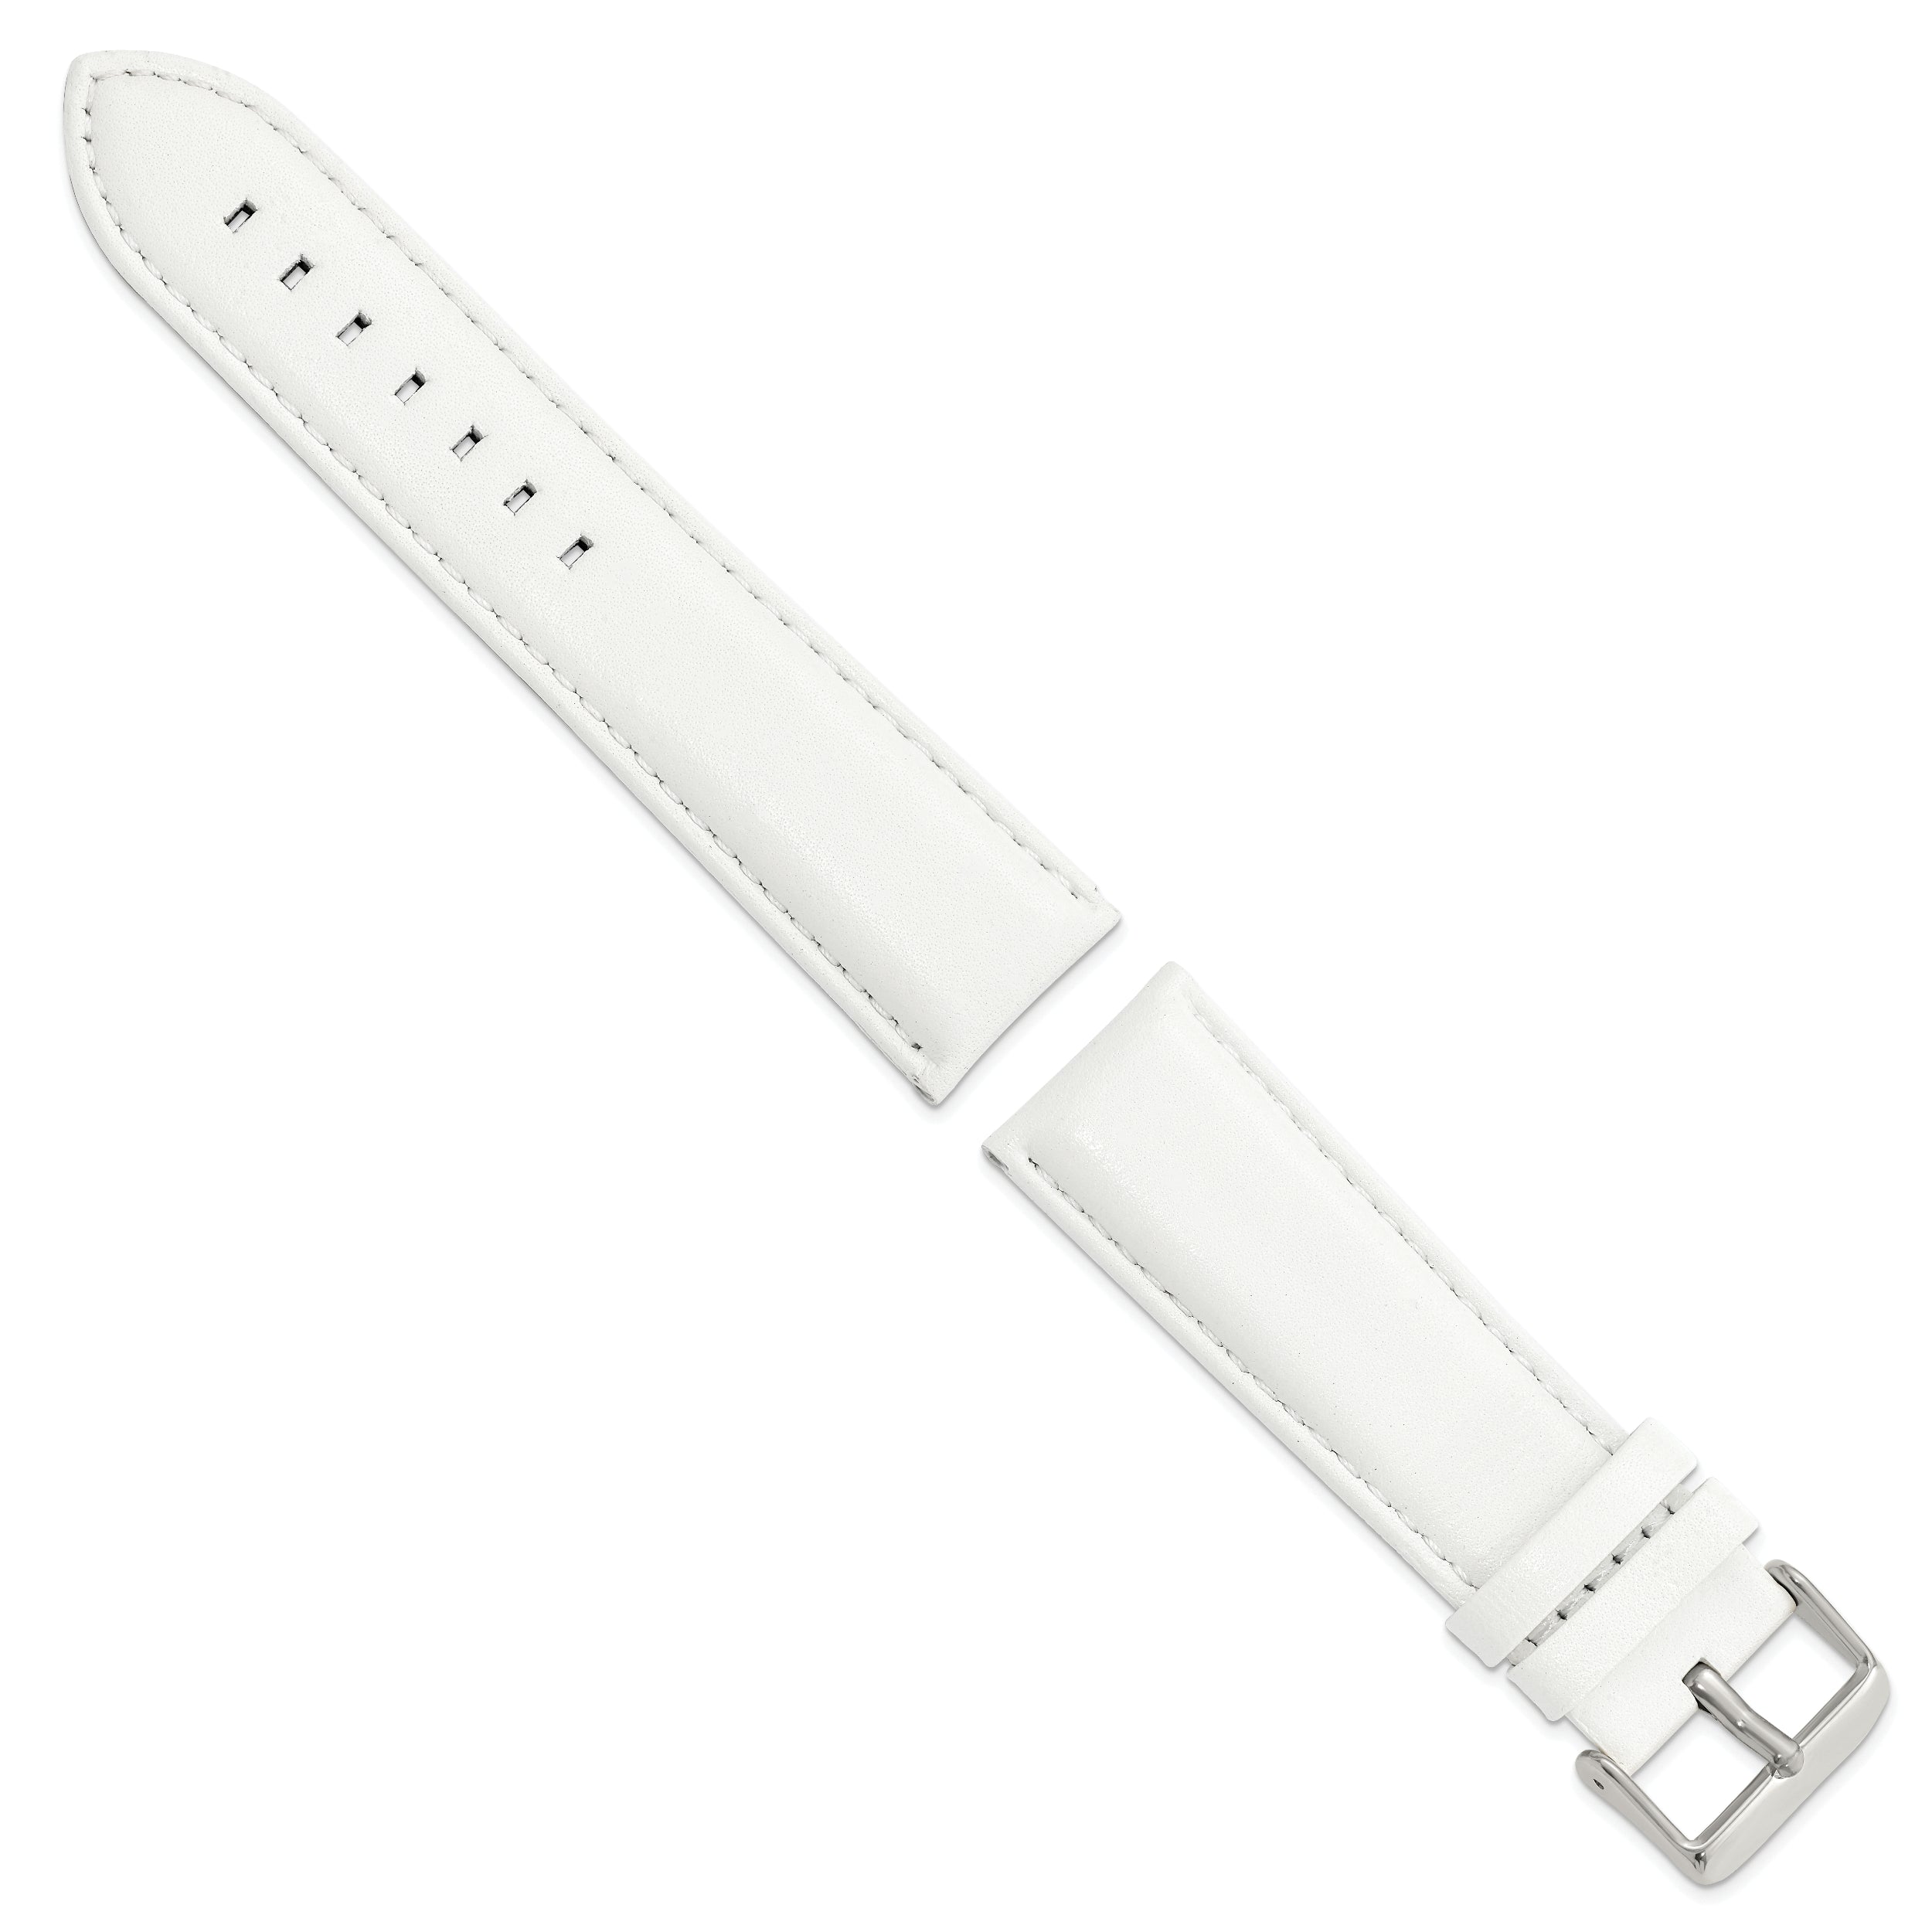 14mm White Glove Leather with Silver-tone Panerai Style Buckle 6.75 inch Watch Band